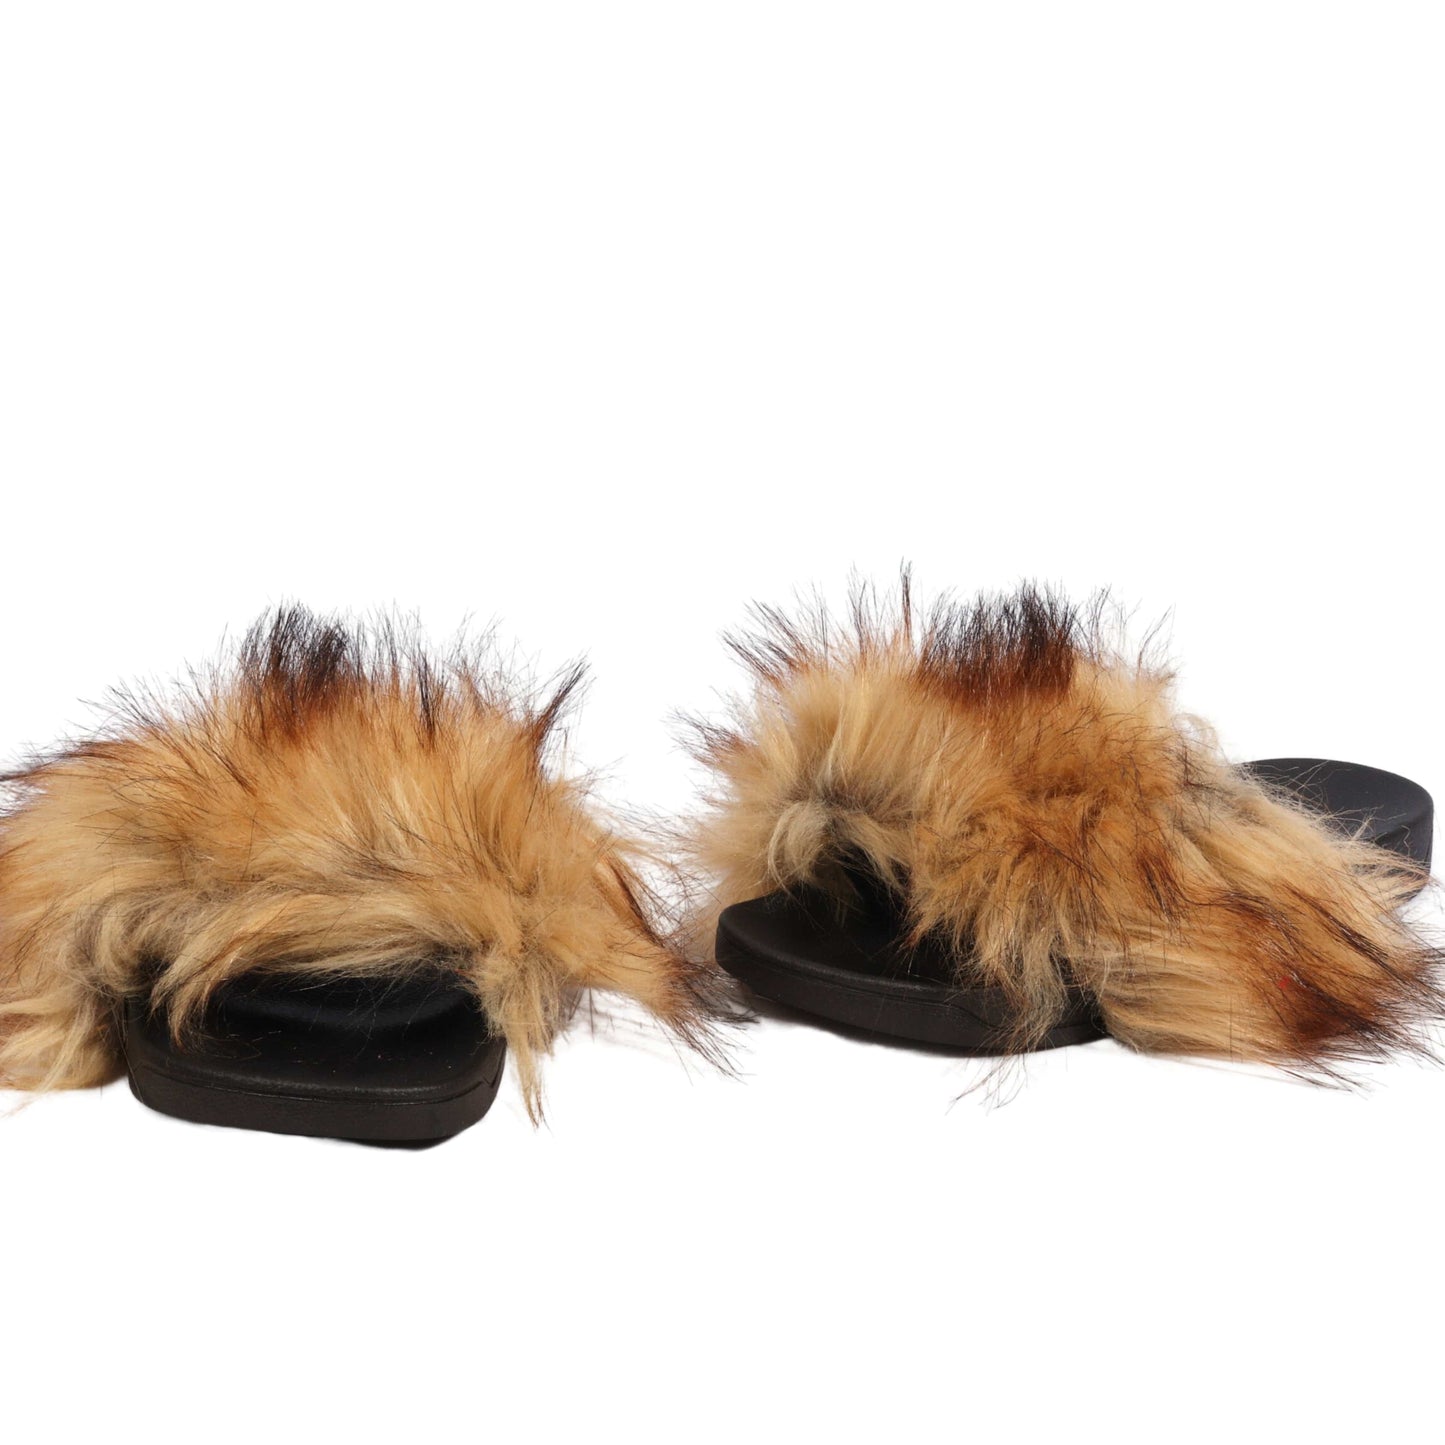 BRANDS & BEYOND Womens Shoes 41 / Brown Fur Slide Slipper Sandal with Soft Furry Faux